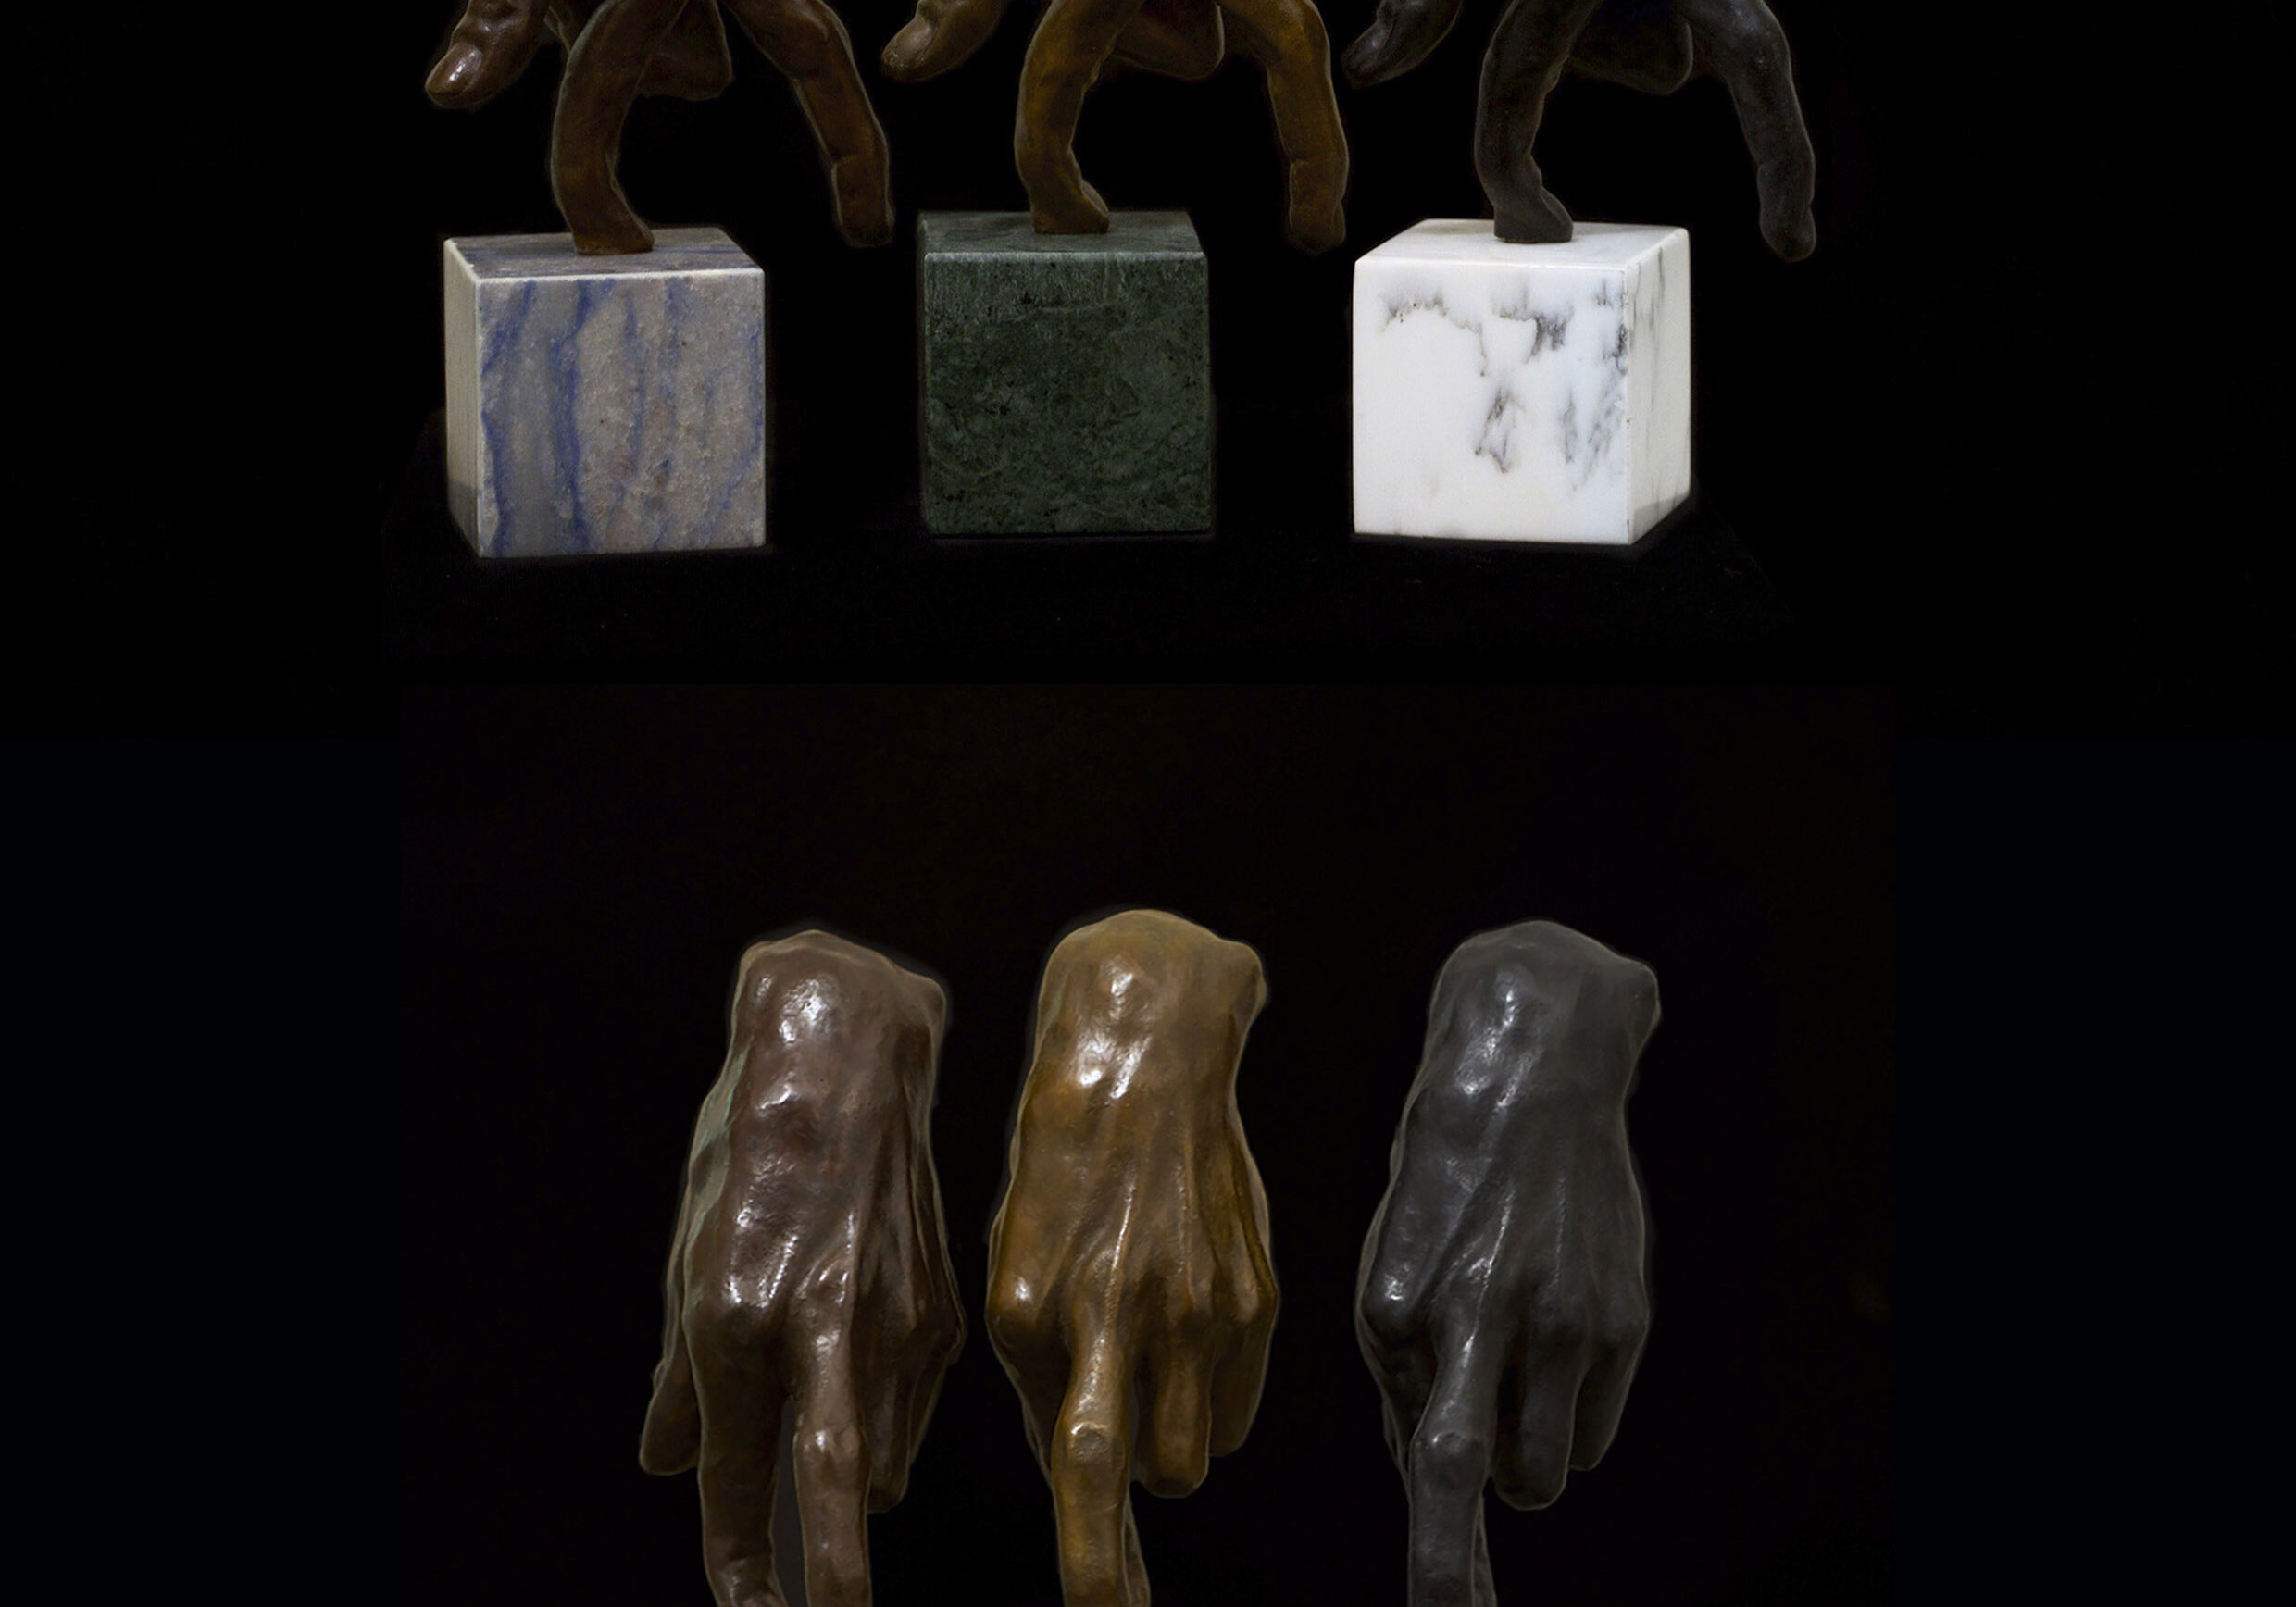 Photograph of multiple hands touching small marble blocks in different colours, by artist Alexandra Slava, resident at GlogauAIR 2019